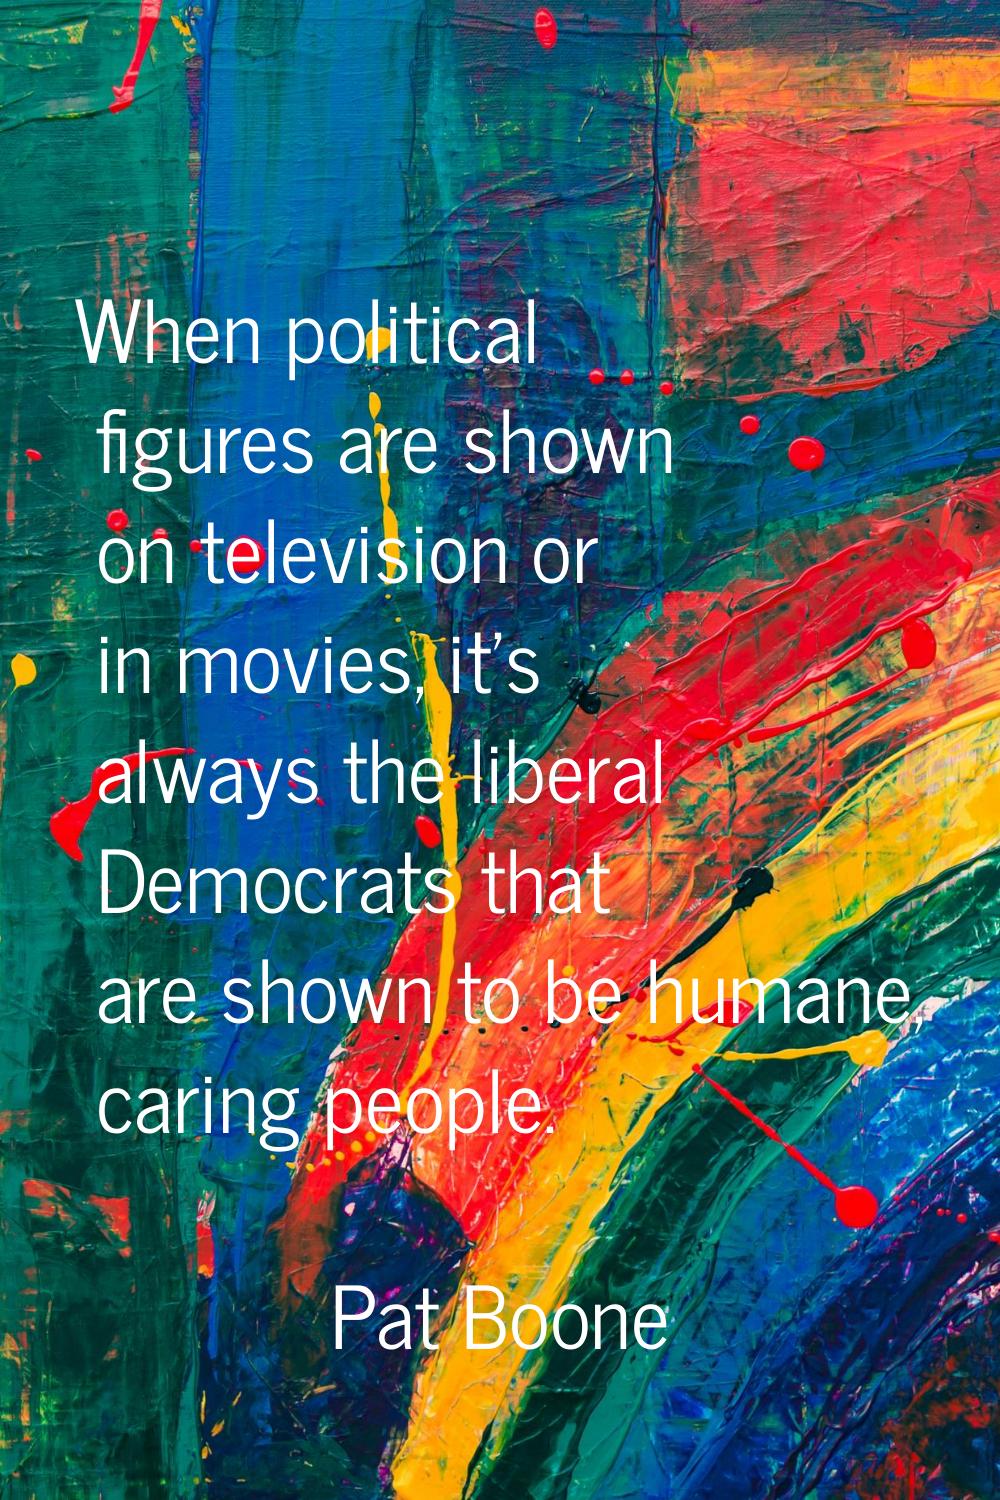 When political figures are shown on television or in movies, it's always the liberal Democrats that